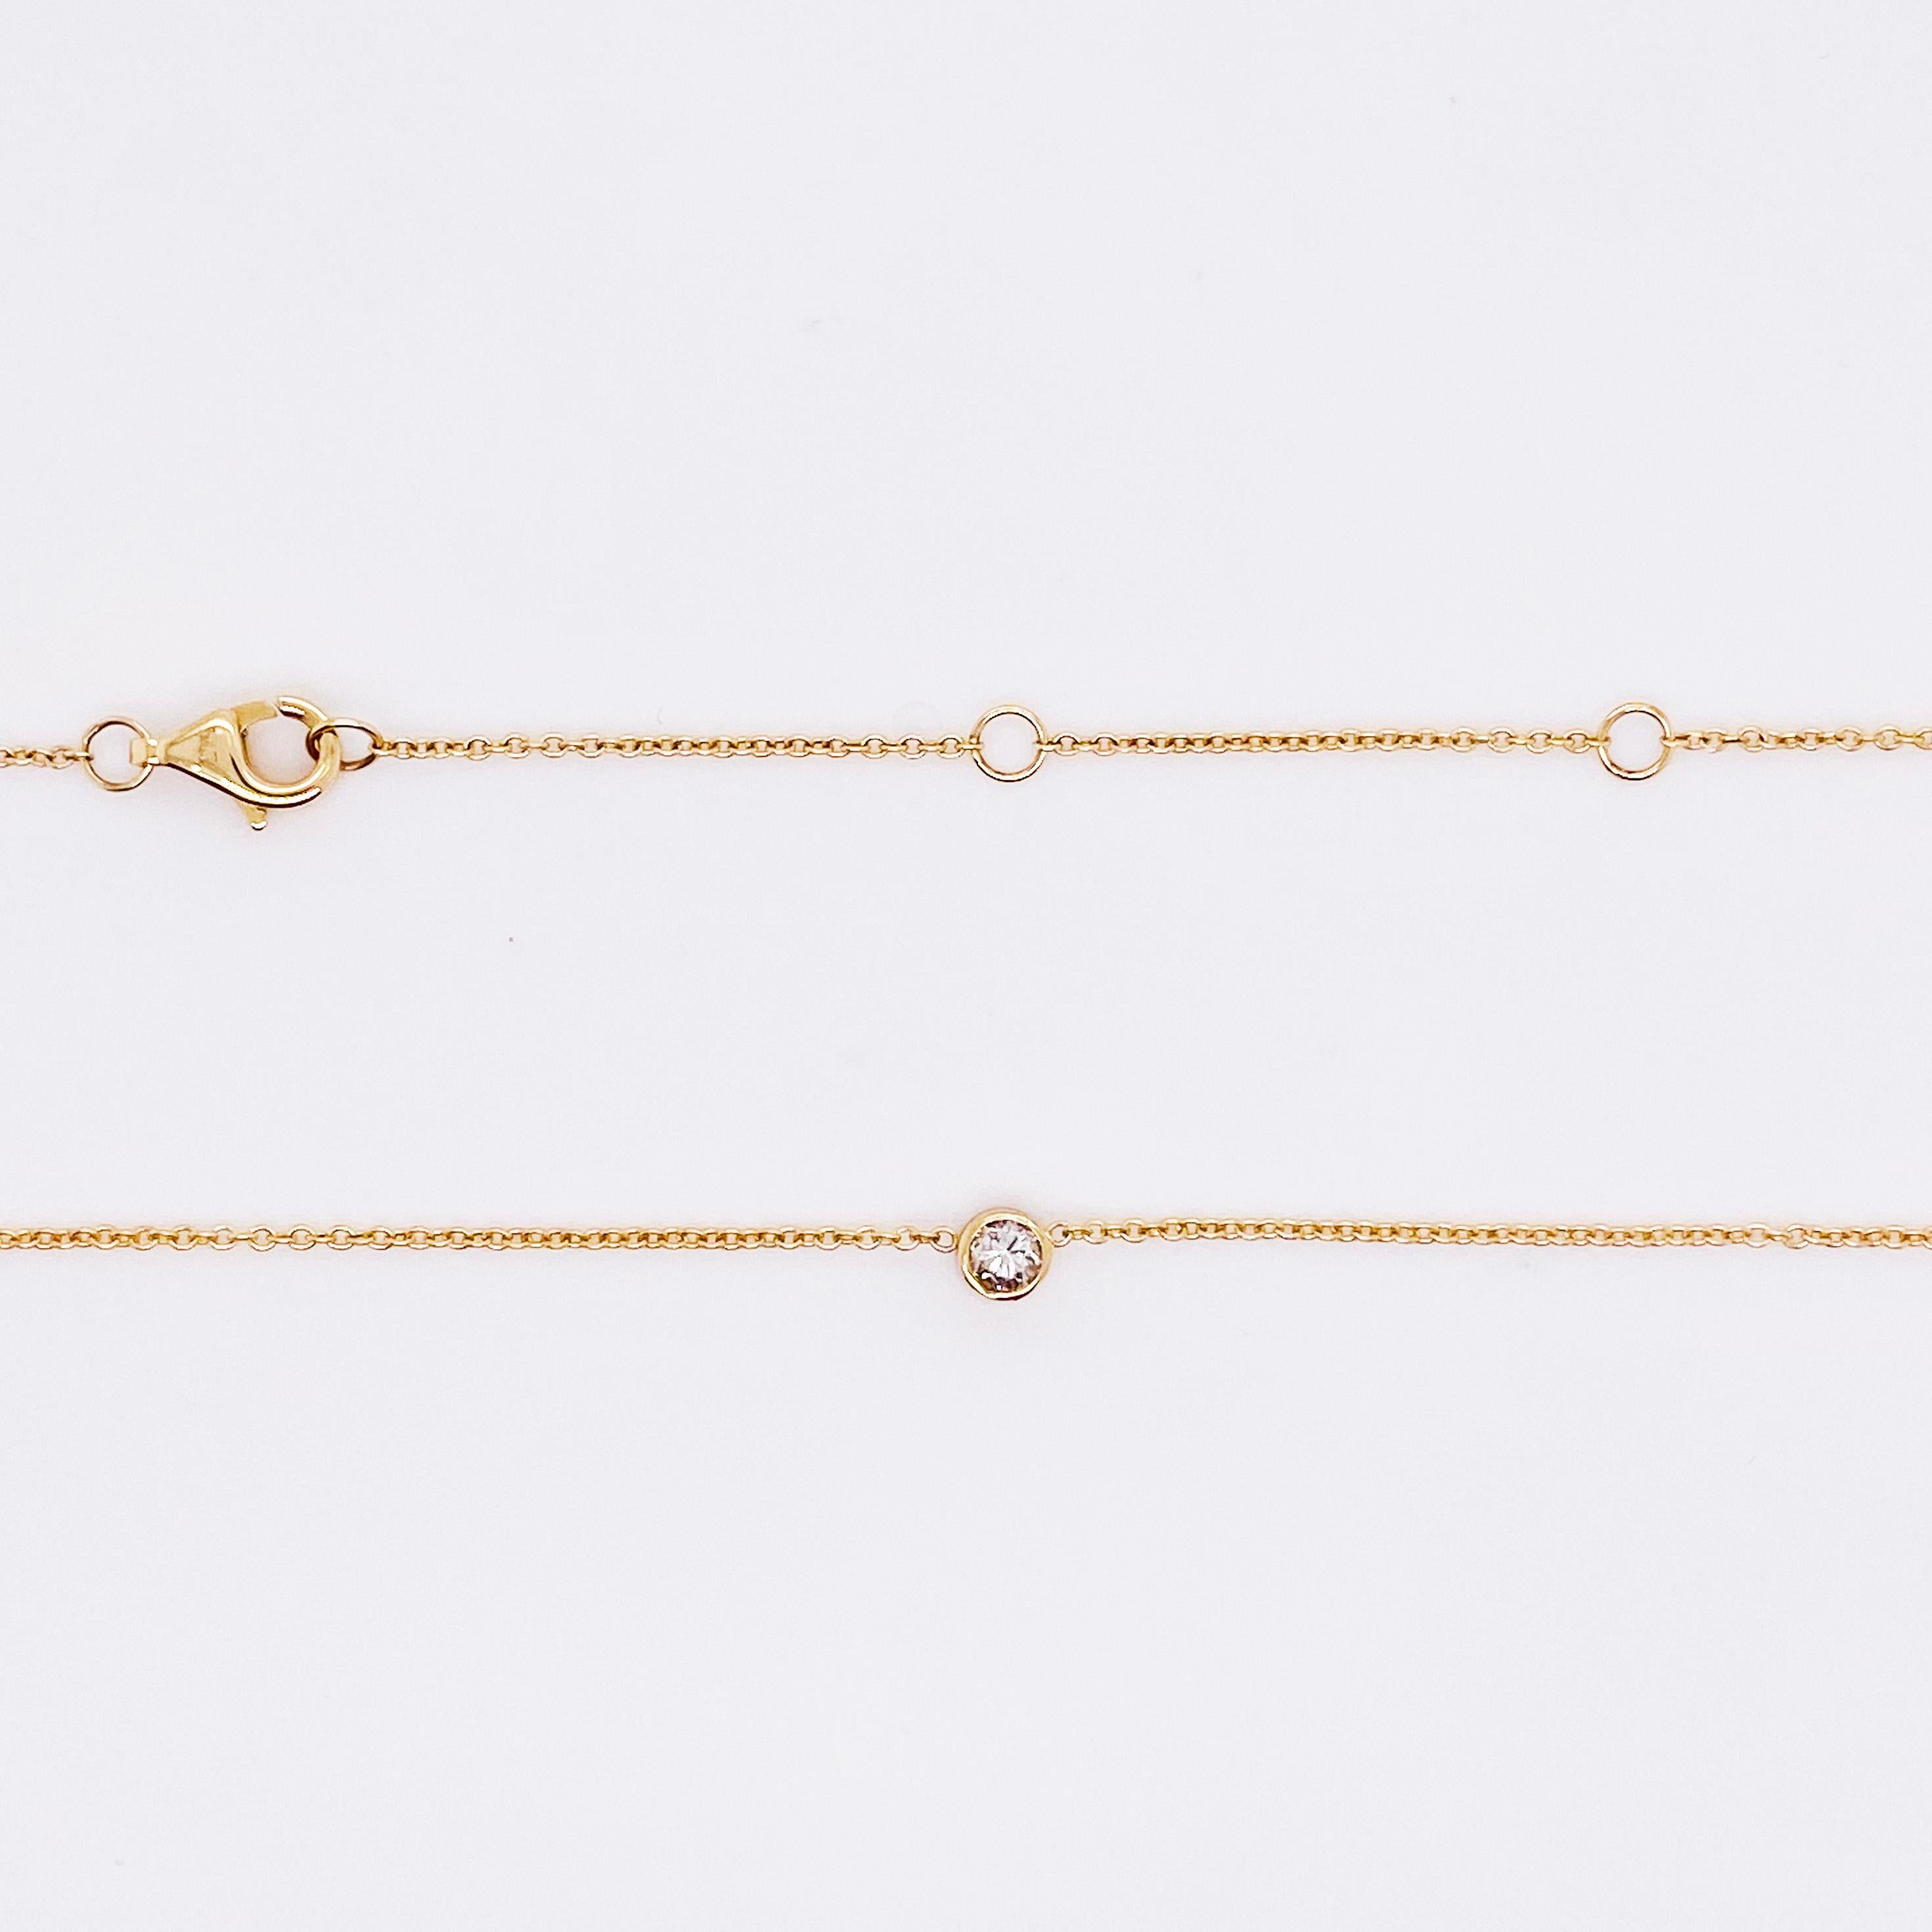 This 14 karat yellow gold diamond bezel necklace is a classic! This simple design is one to be worn everyday and with any outfit.  You can wear it with your finest dress and also in your workout clothes.  The diamond is lovely and shines from any